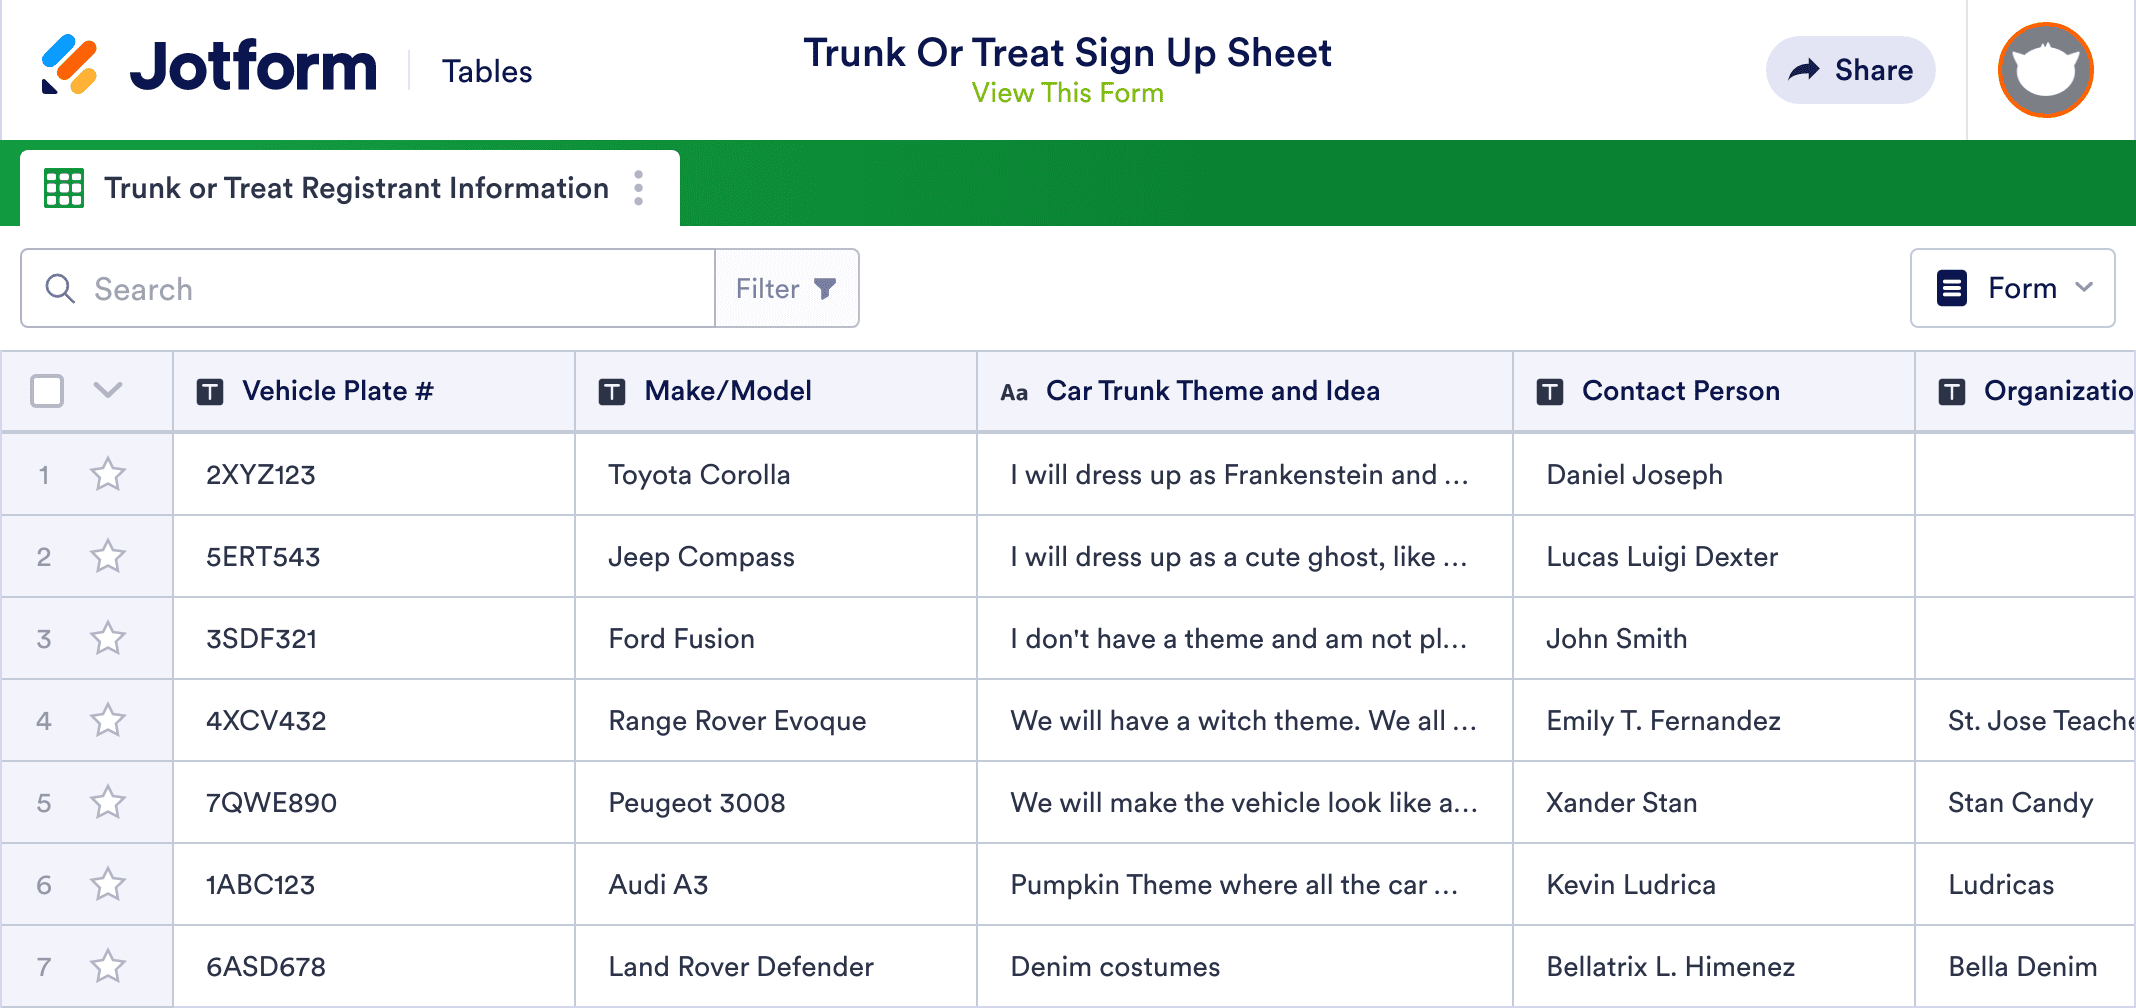 trunk-or-treat-sign-up-sheet-template-jotform-tables